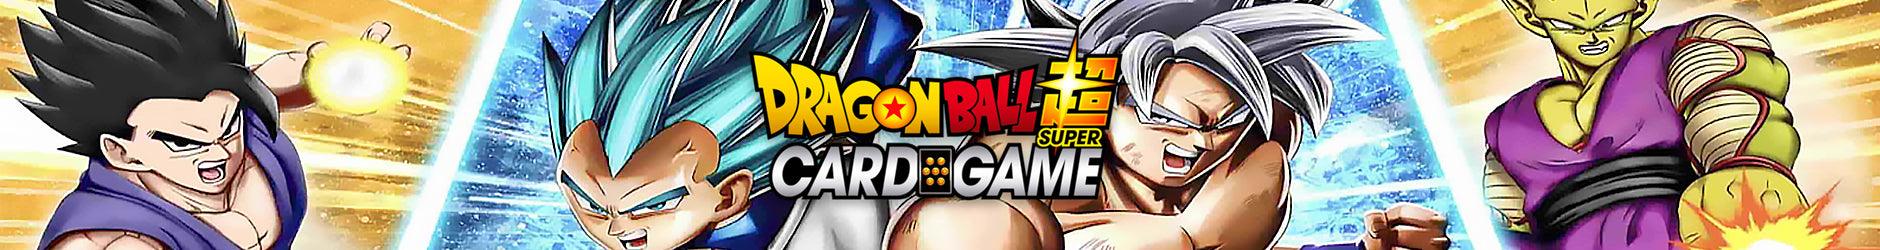 Dragon Ball Super Featured Products - Romulus Games